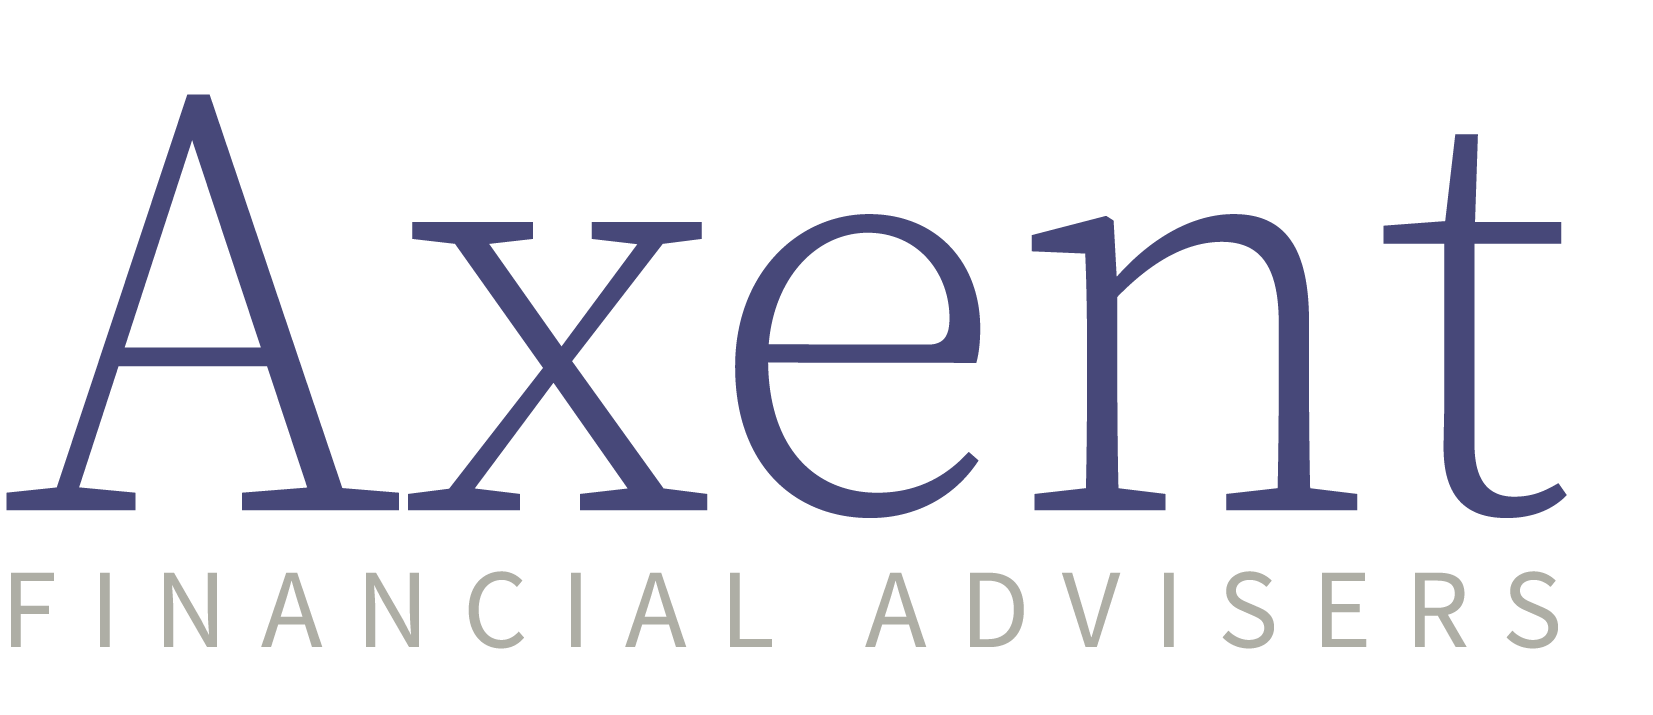 Axent Financial Advisers